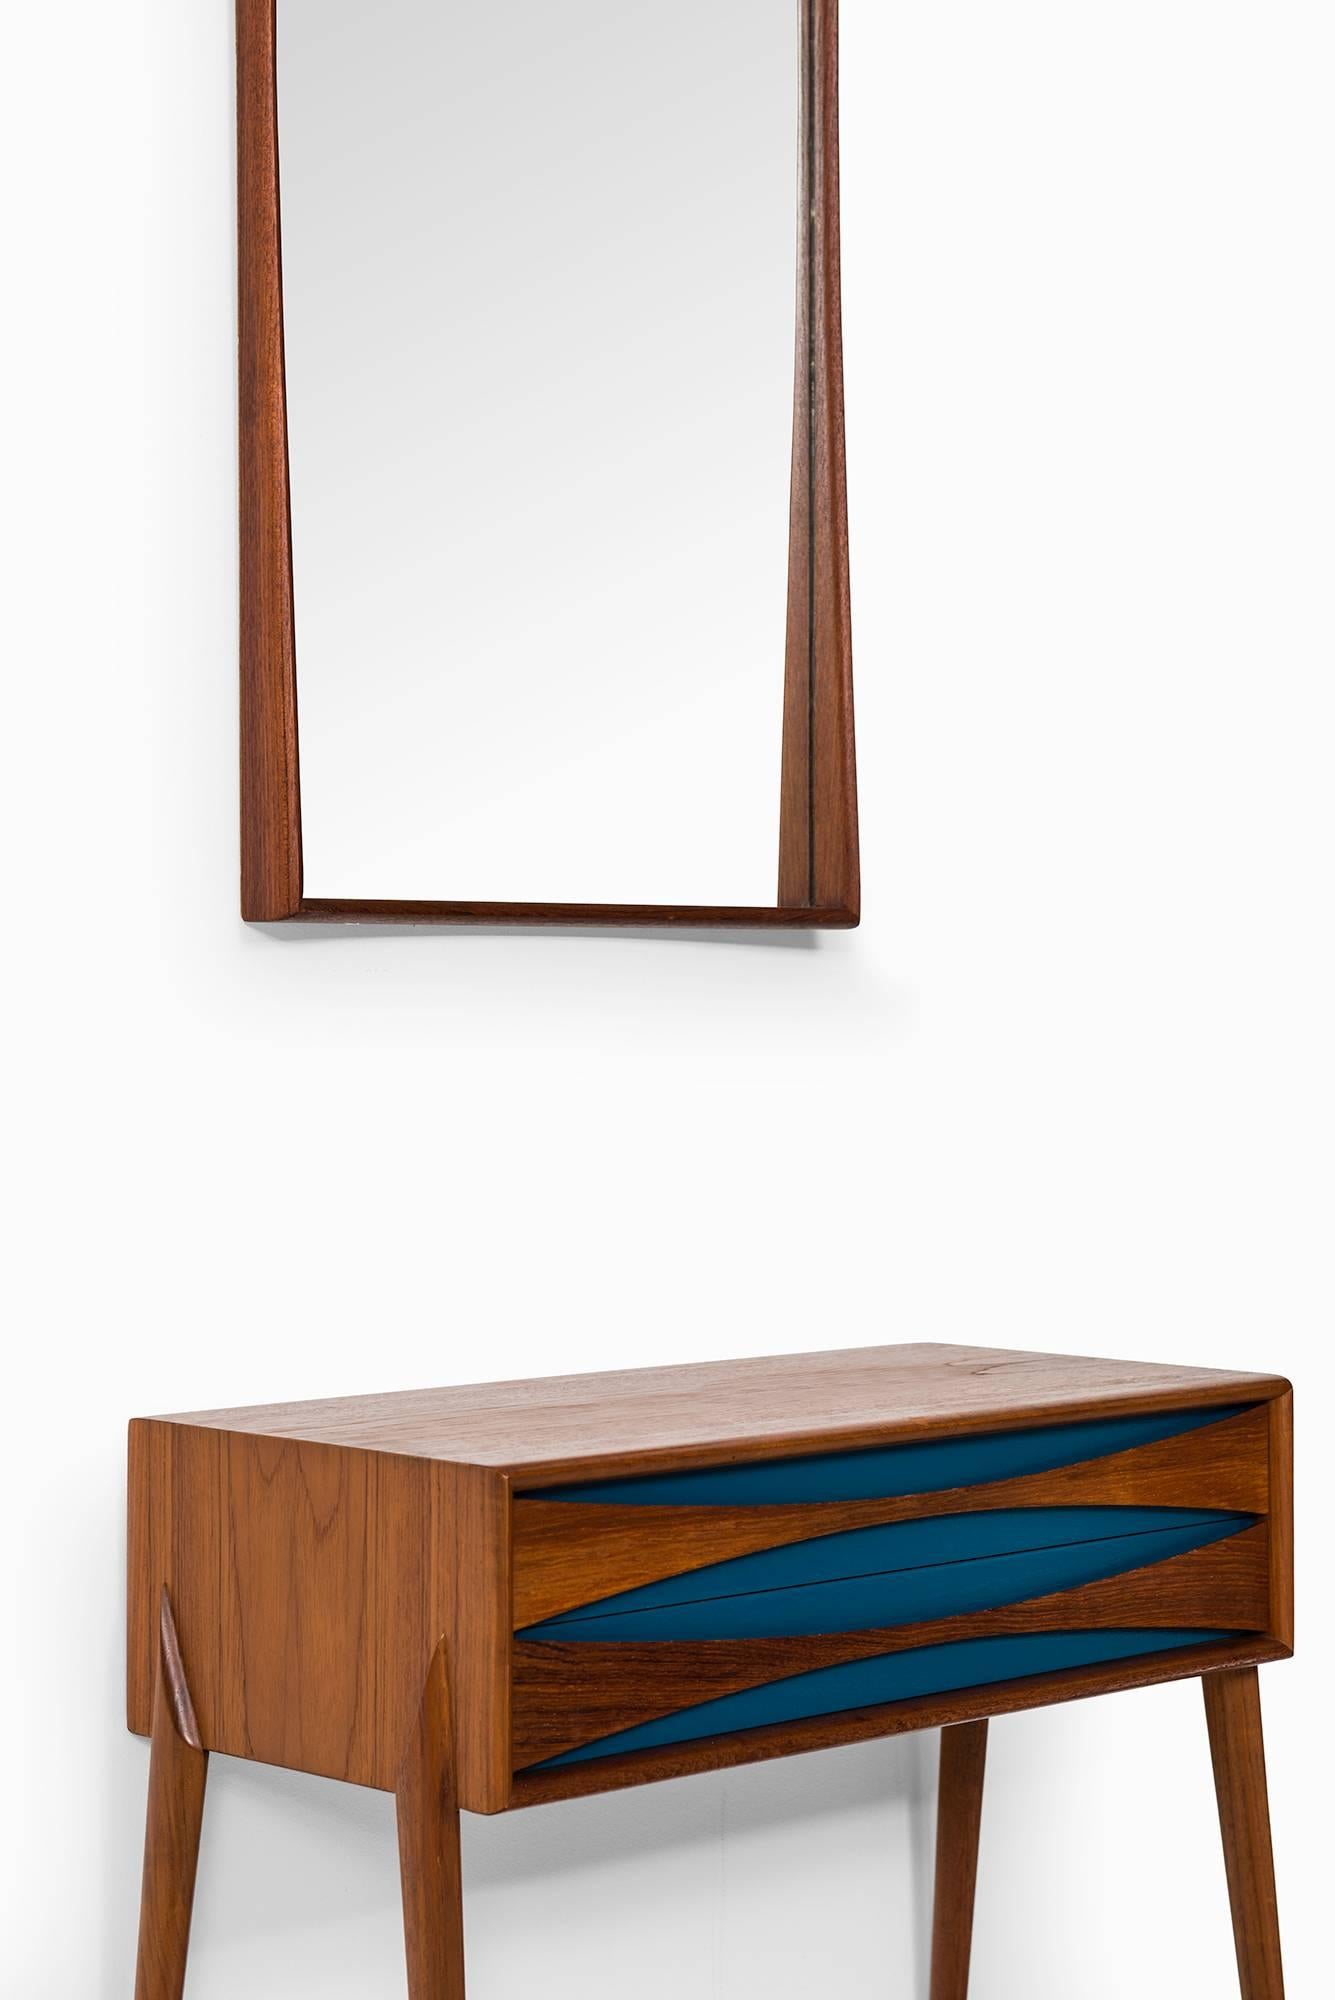 Rare side table and mirror in the manner of Arne Vodder. Produced by Glas & Trä Hovmantorp in Sweden.